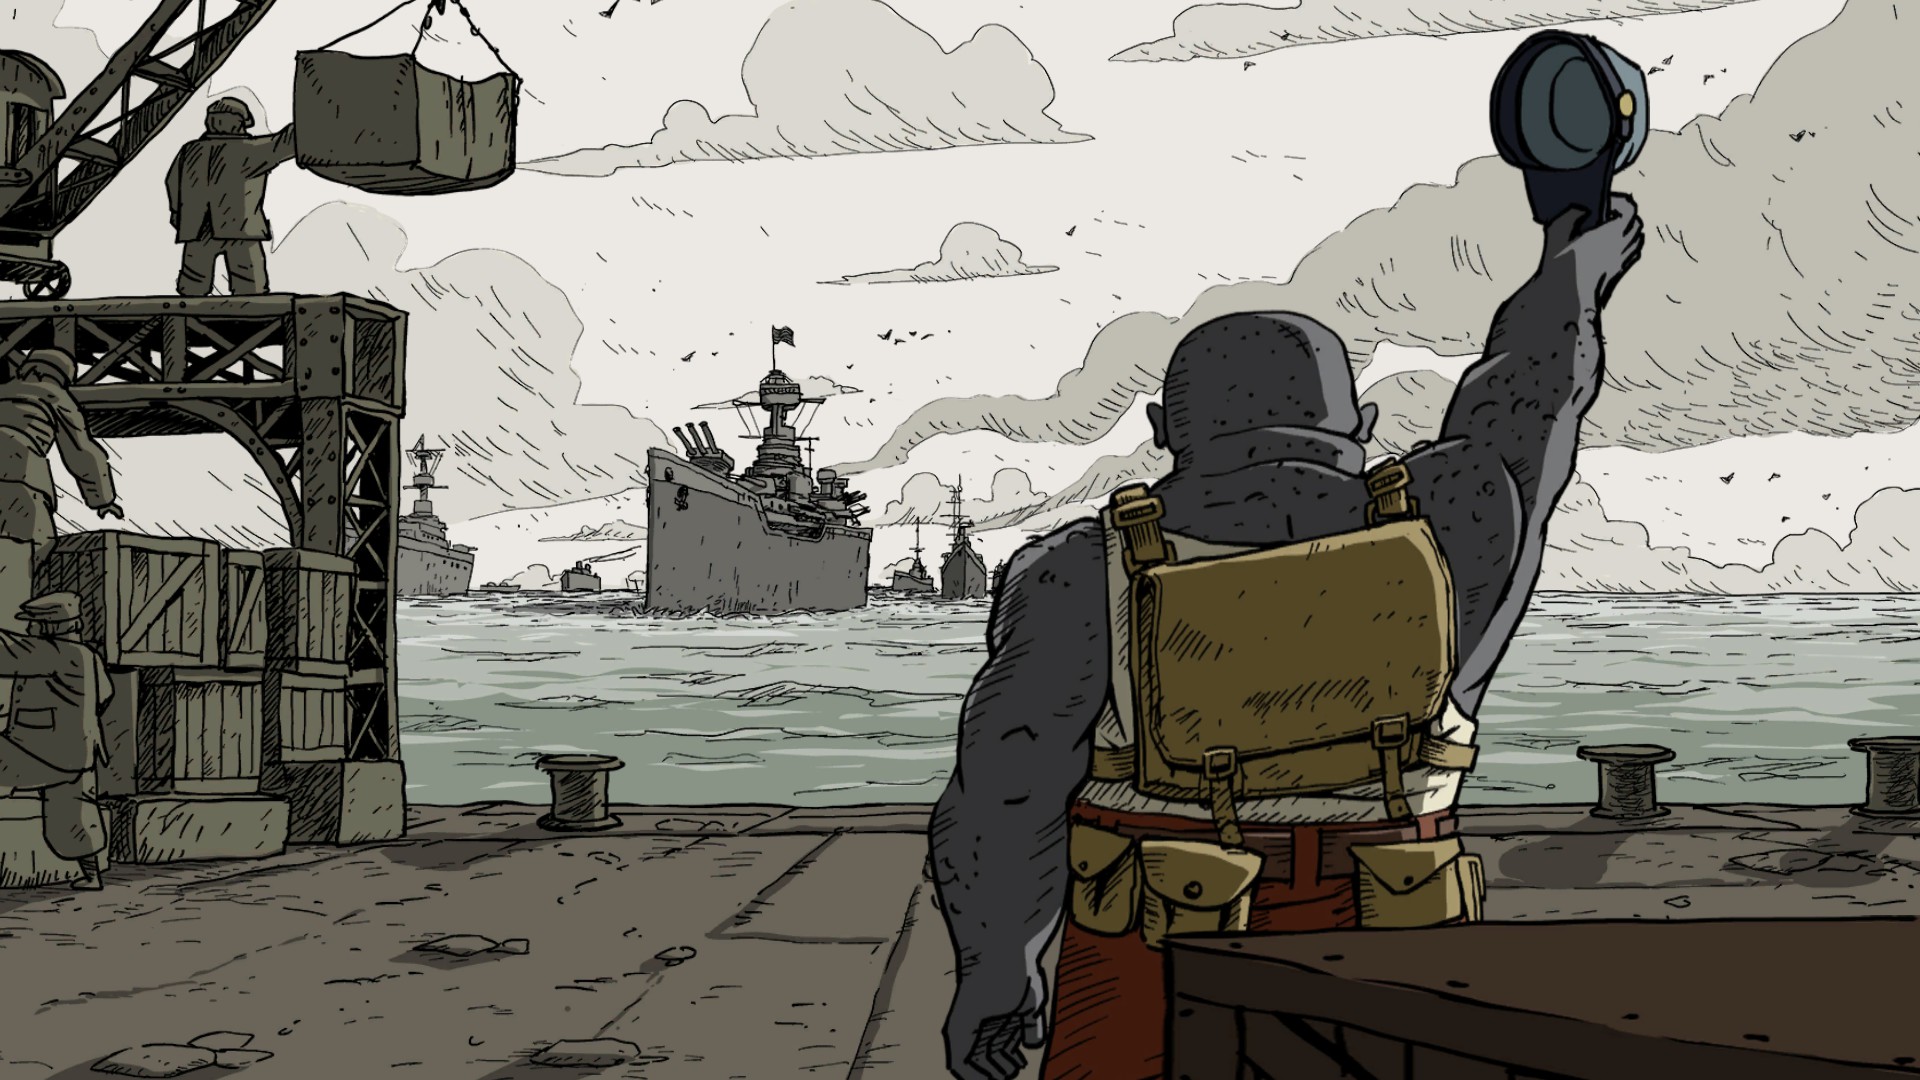 10+ Valiant Hearts: The Great War HD Wallpapers and Backgrounds